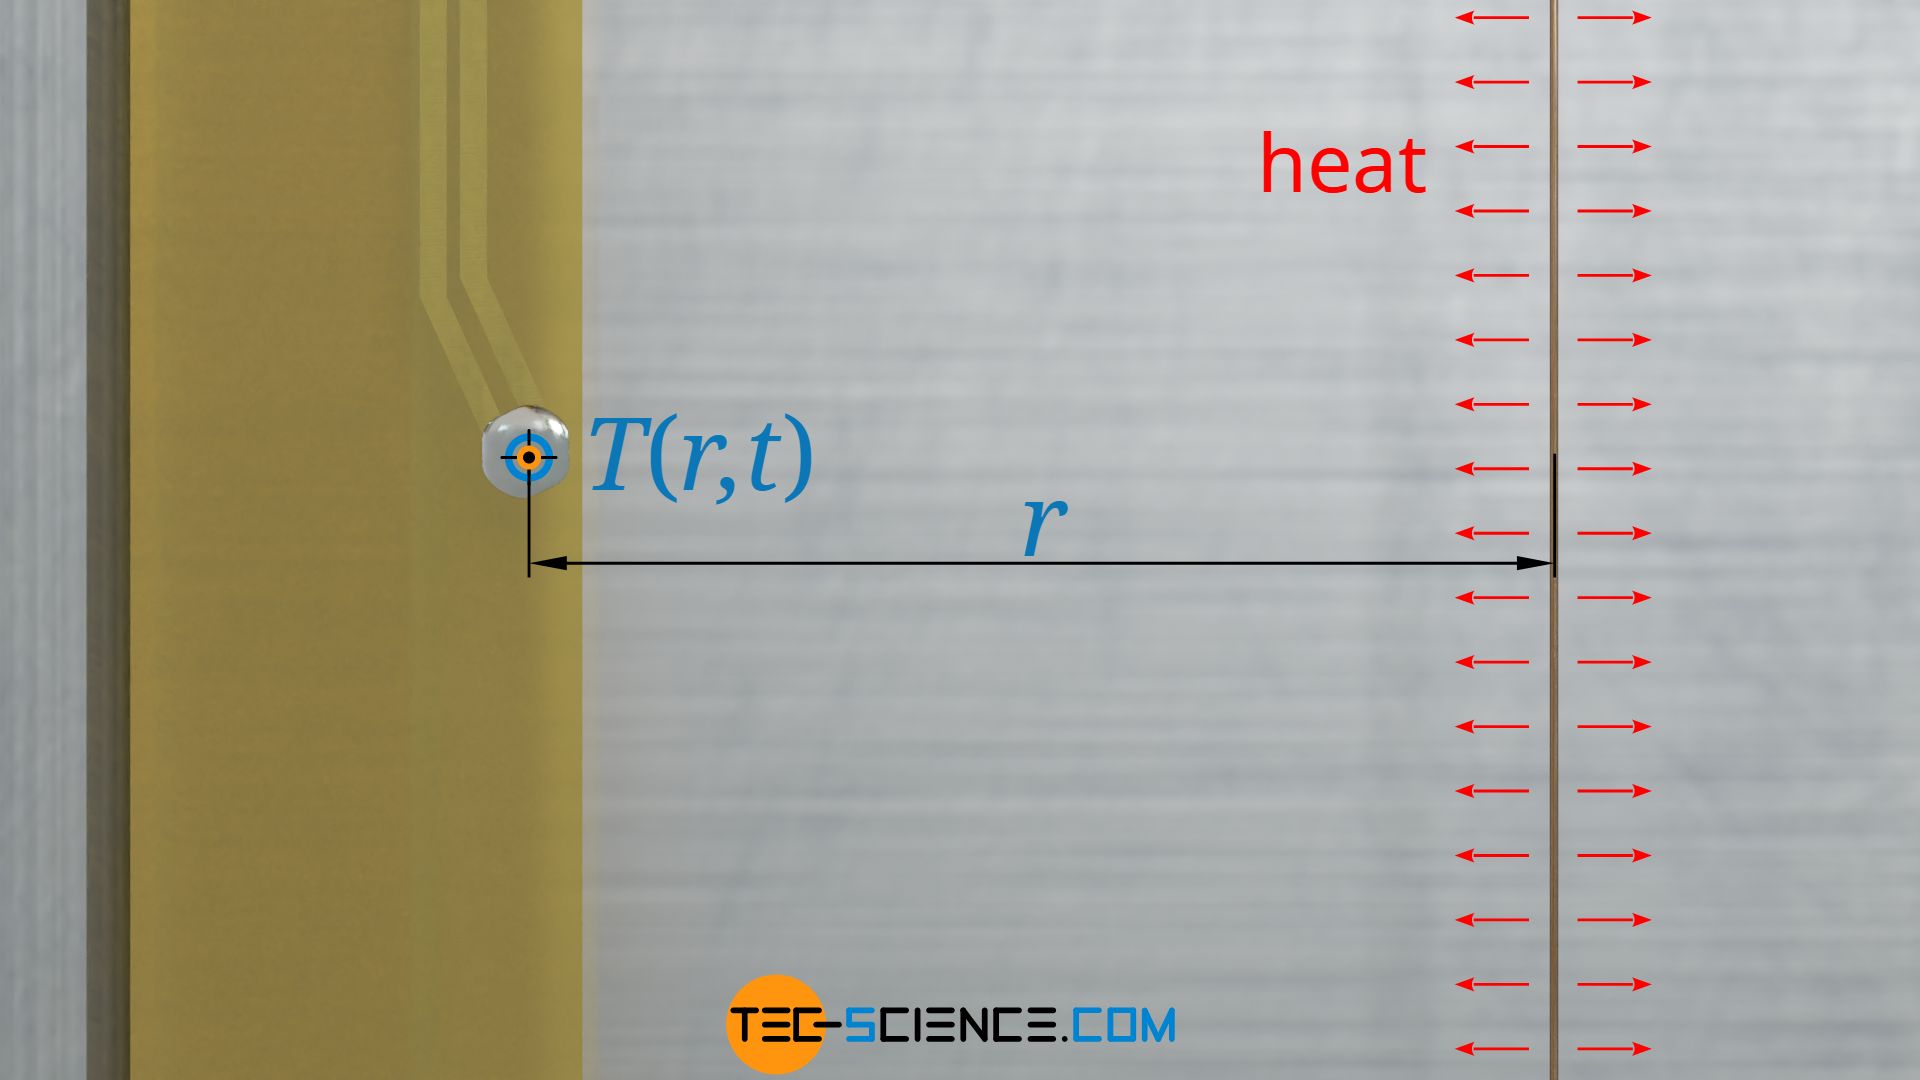 Calculation of the temperature rise over time for a point at a certain distance from a thin heated wire